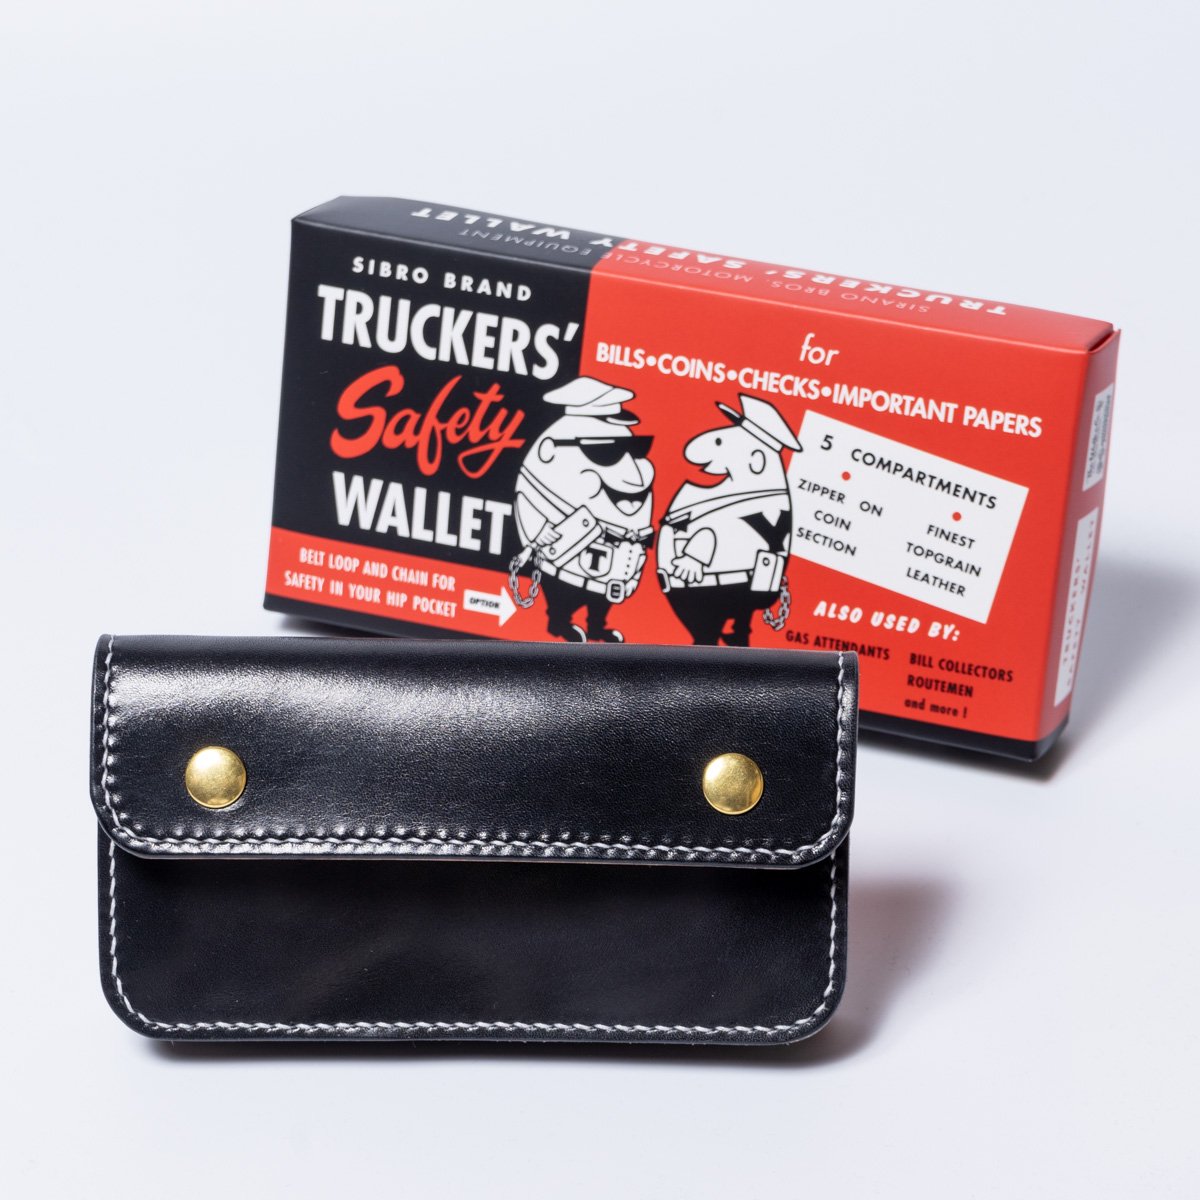 SME] Truckers' Safety Wallet, Black - Web store | SIRANO BROS. & Co.